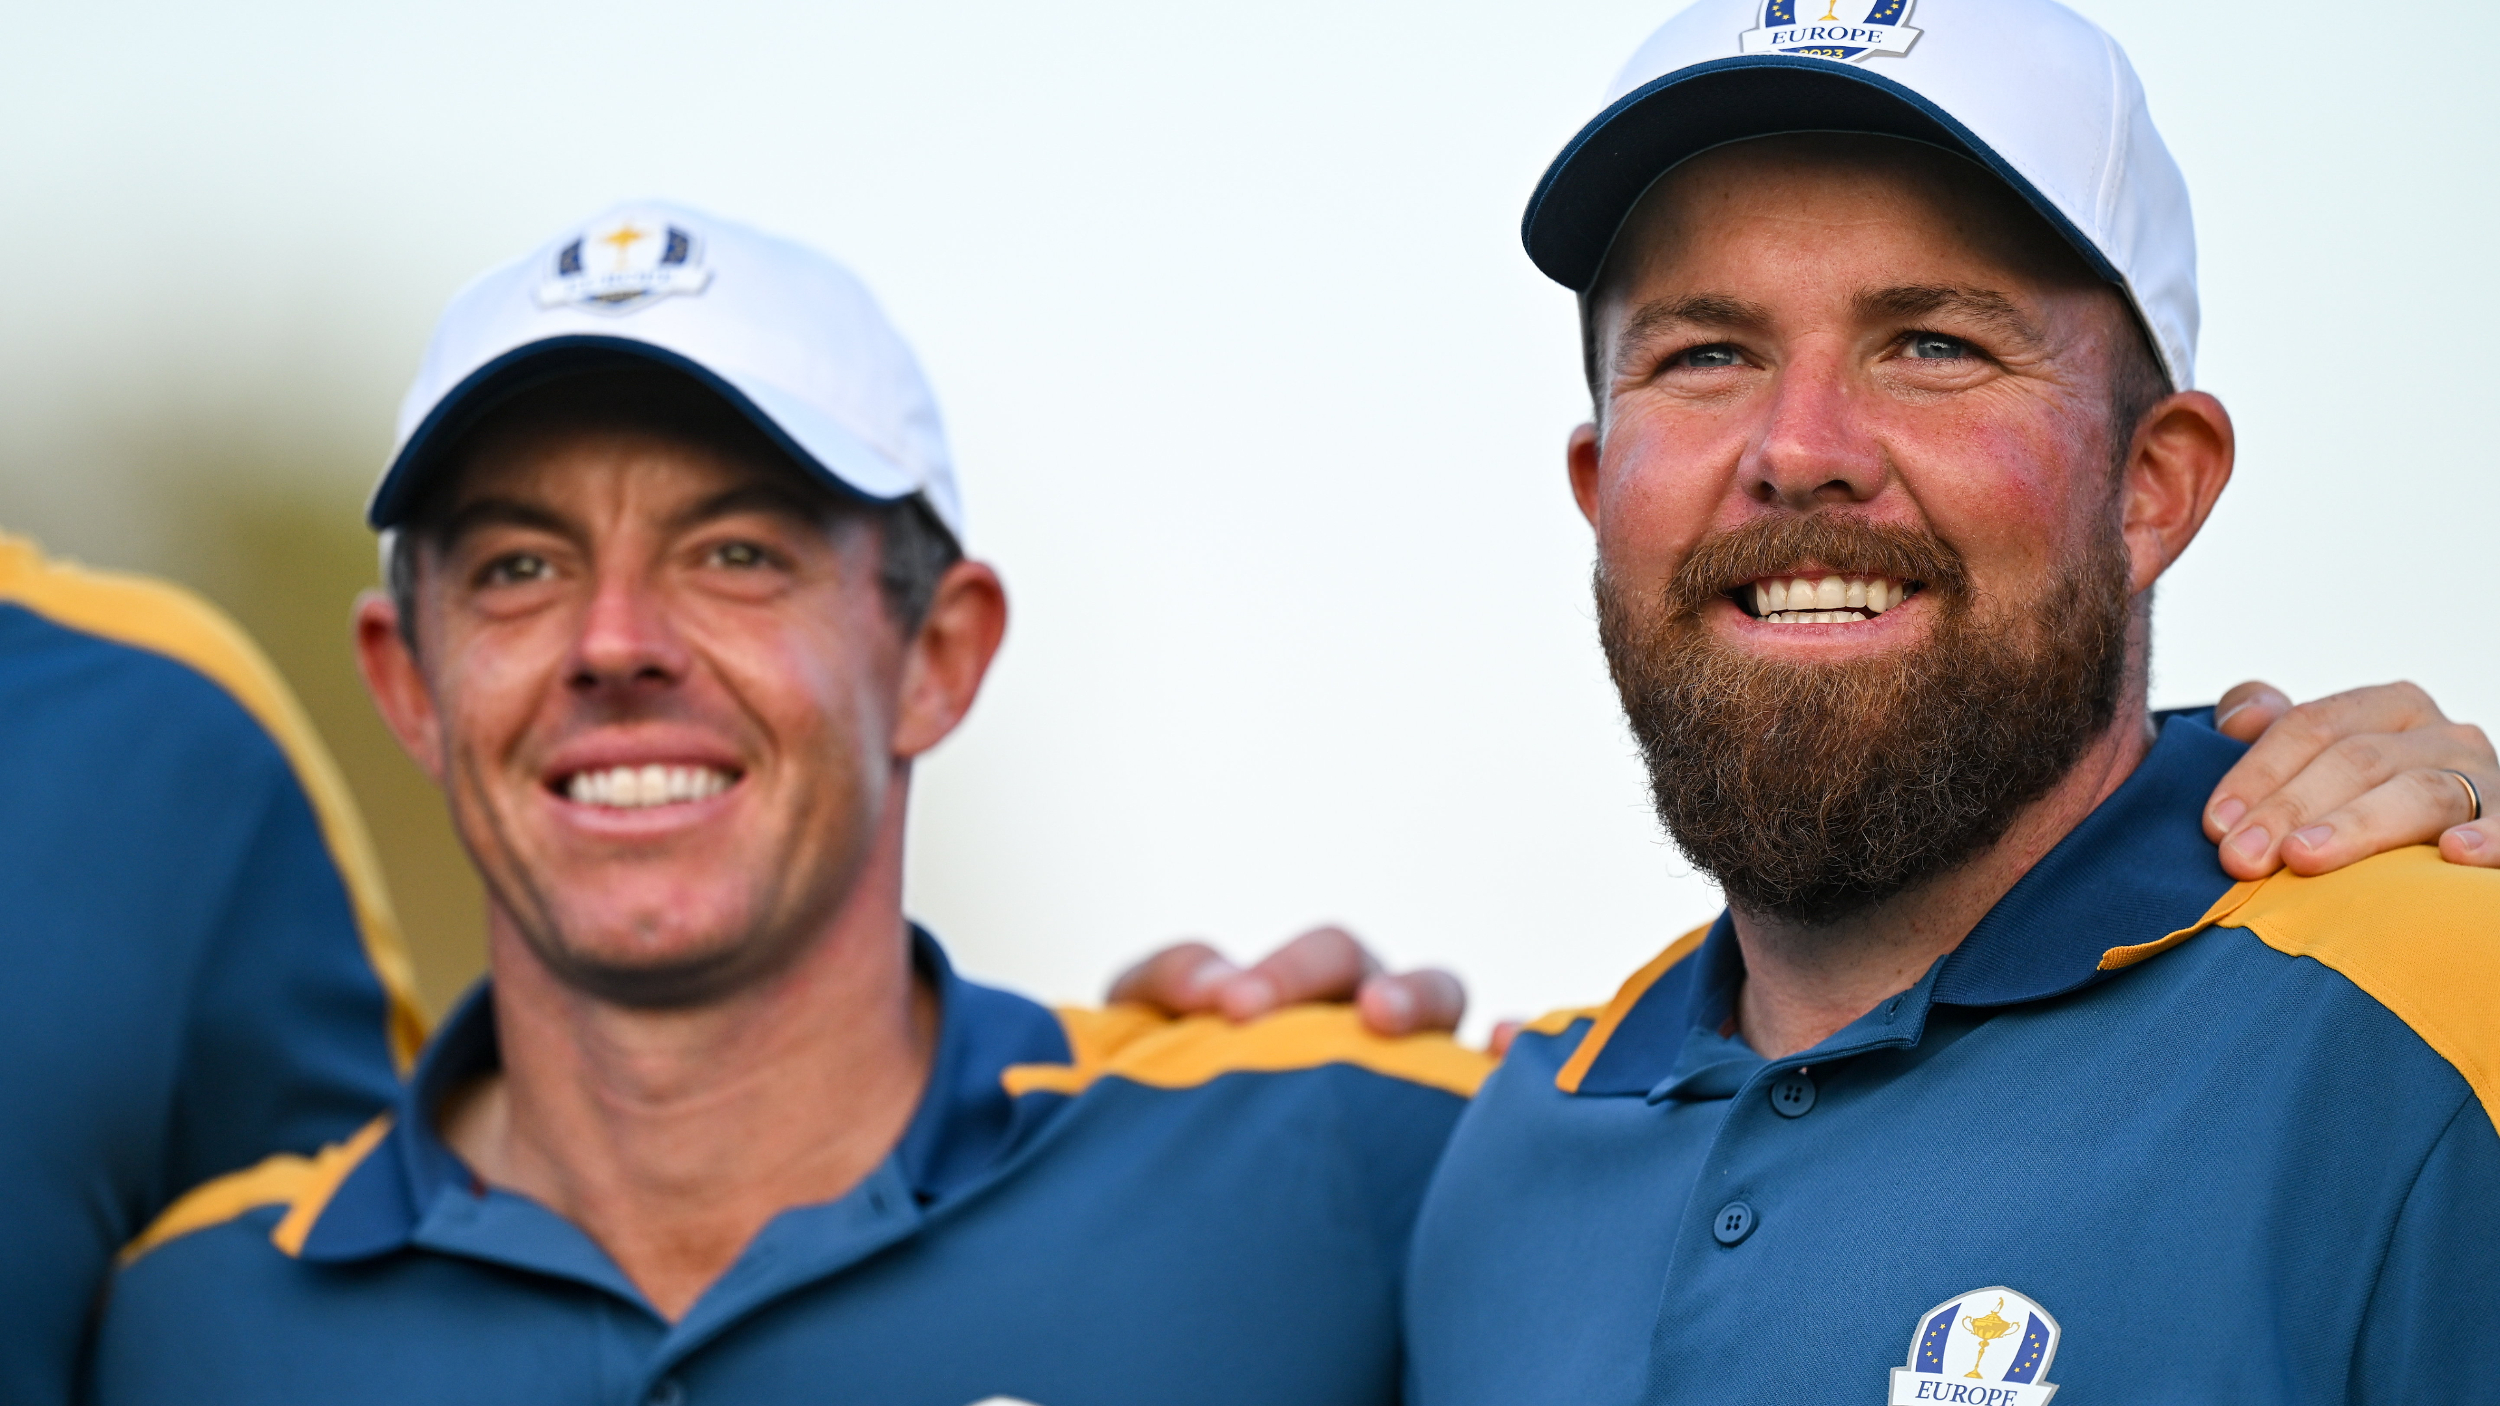 Rory McIlroy and Shane Lowry at the Ryder Cup